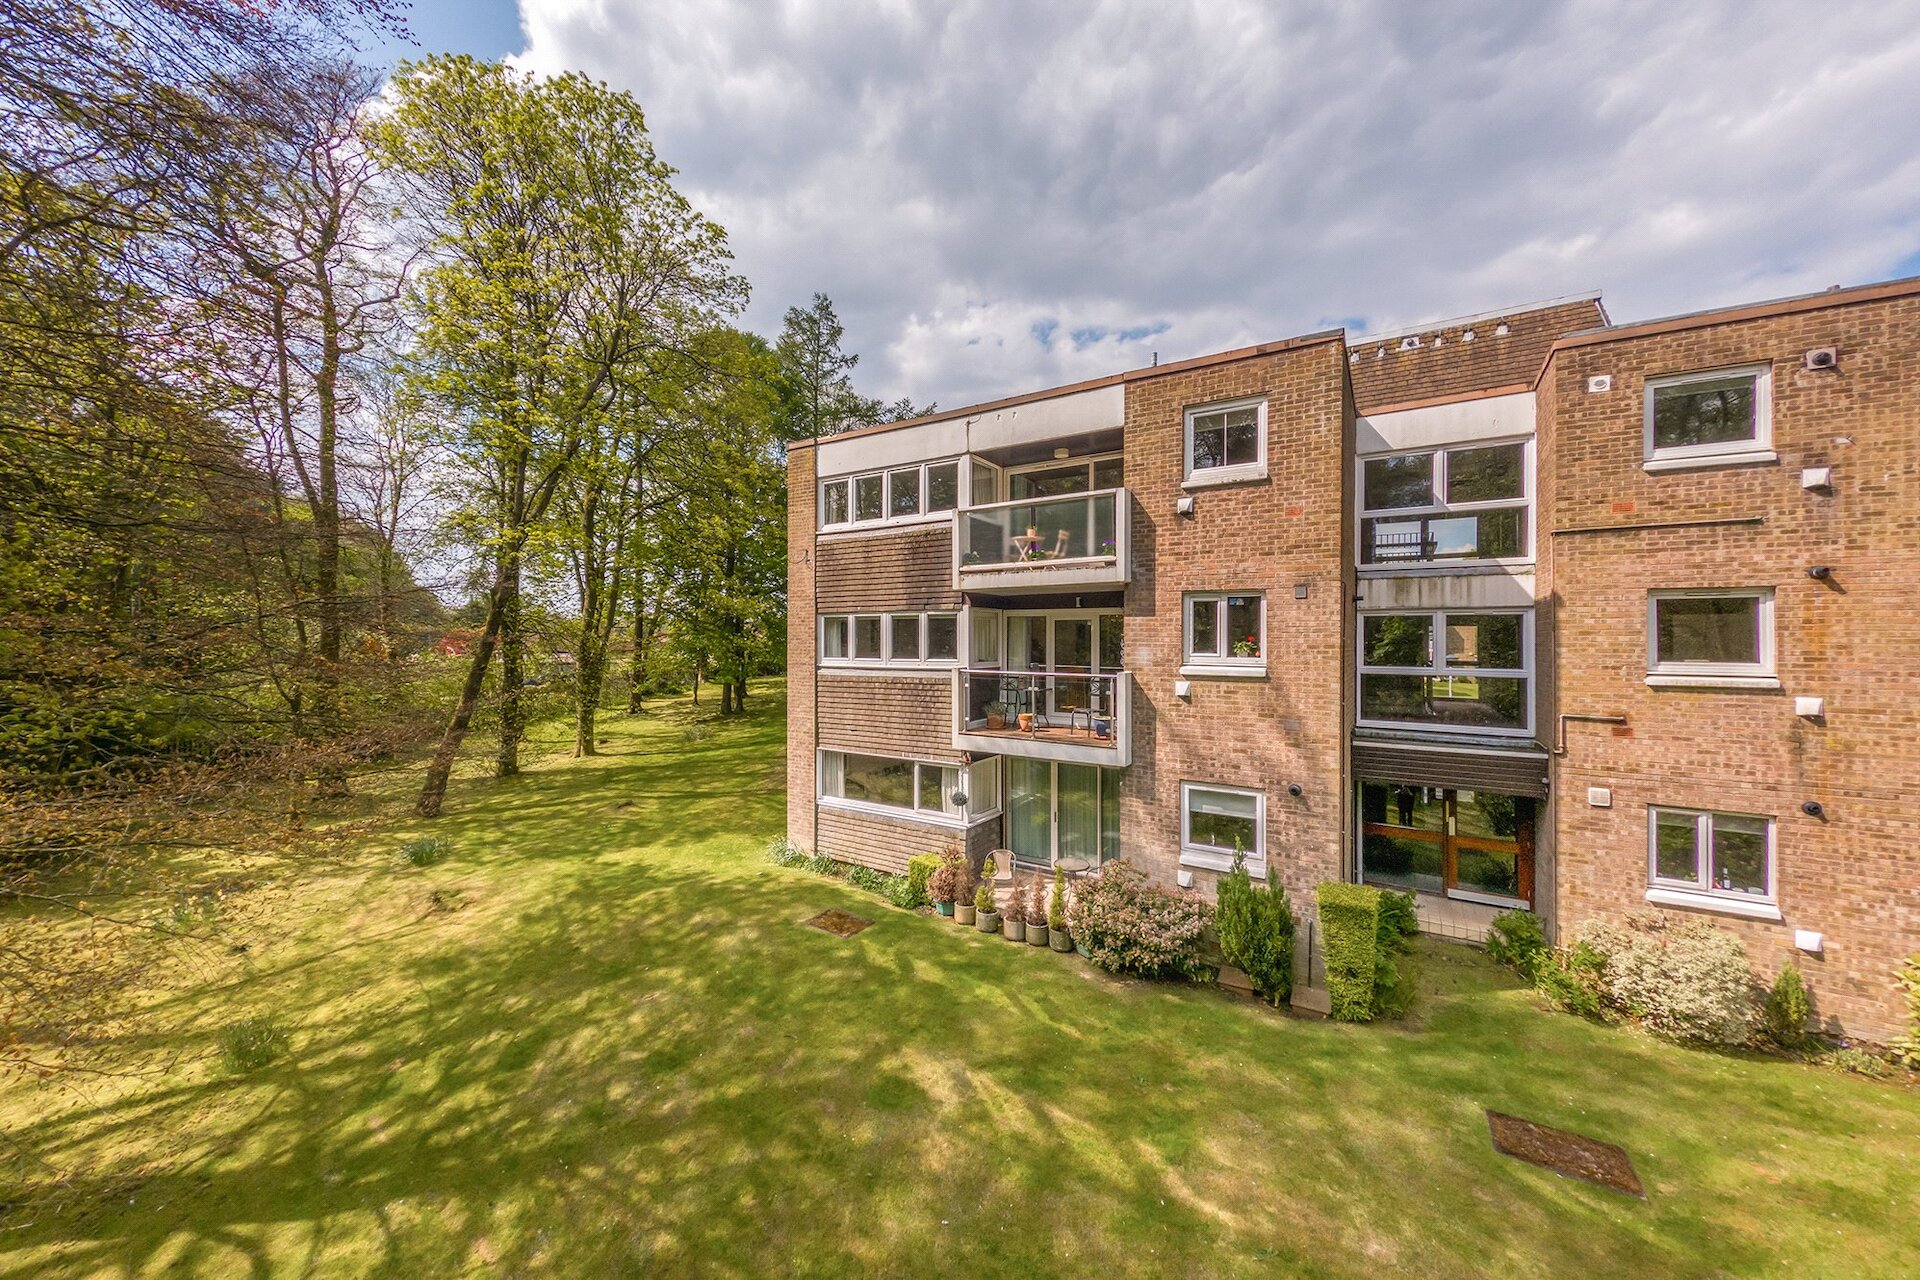 Flat 2/3, Whistlefield Court, 2 Canniesburn Road, Bearsden, G61 1PX - Picture #1